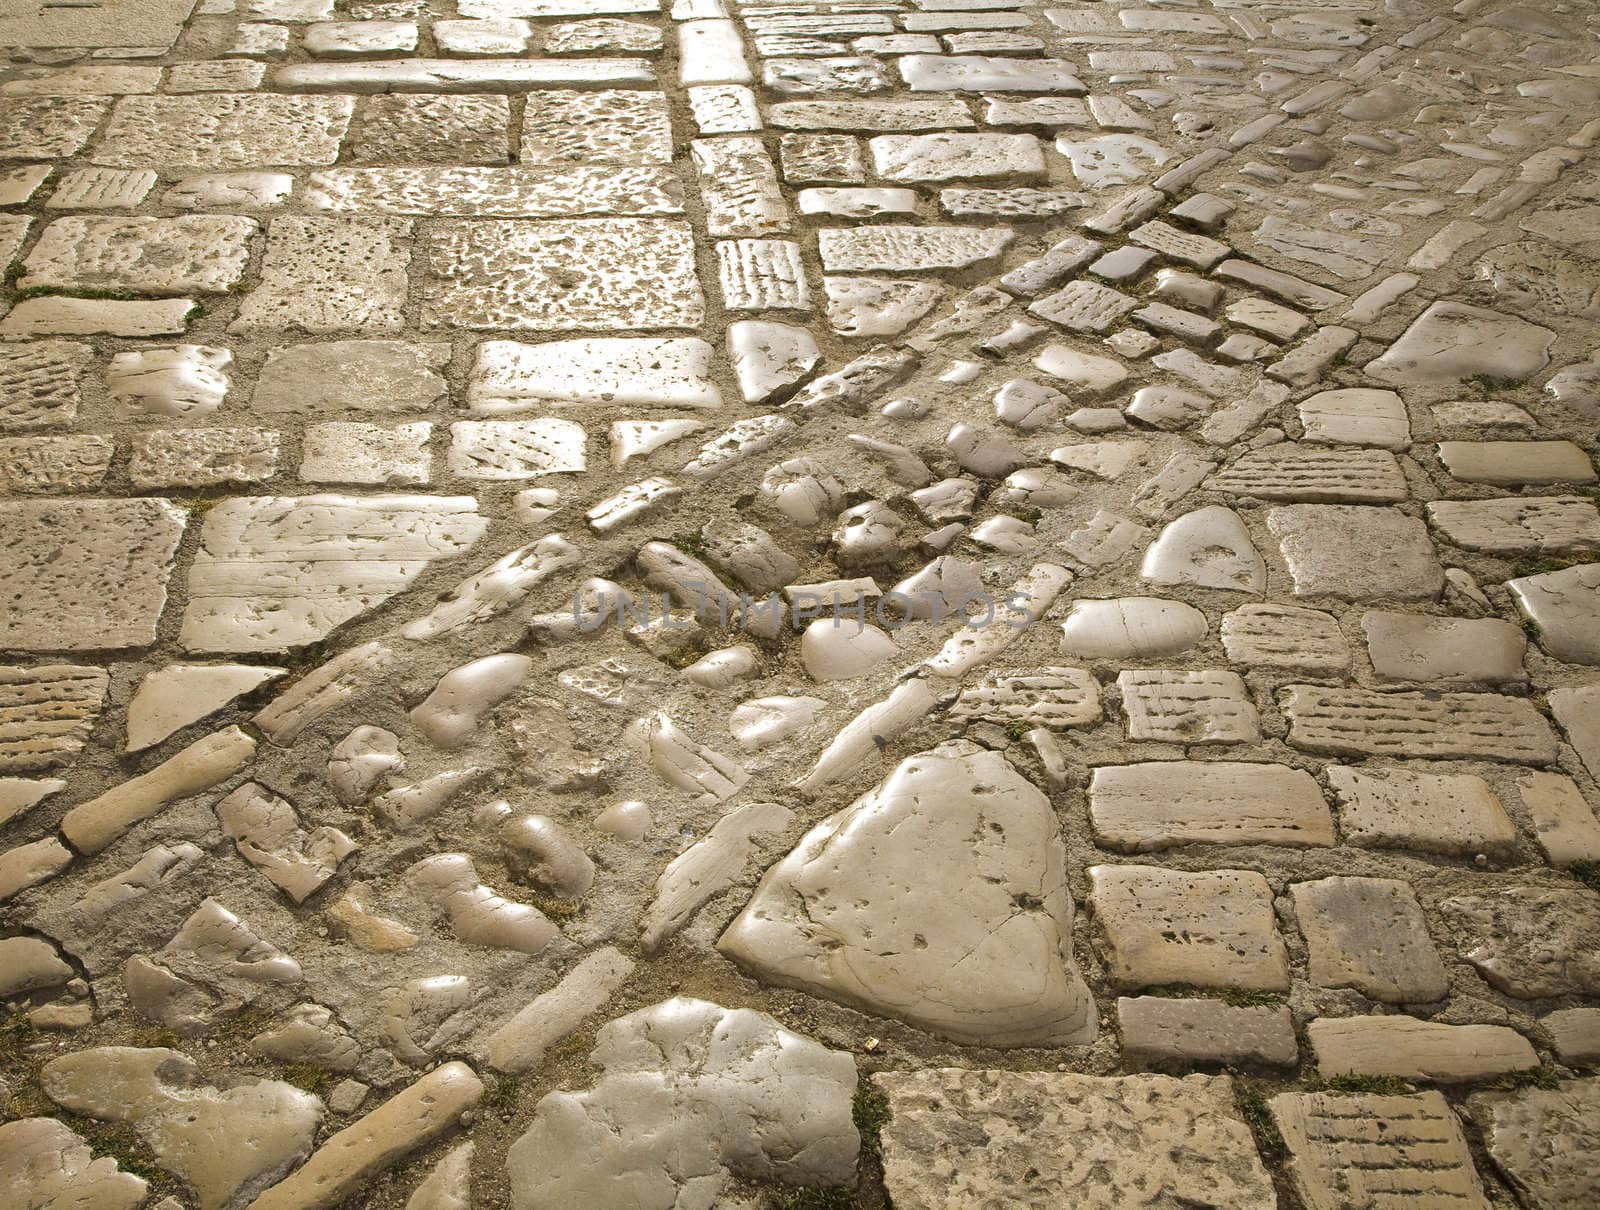 Cobblestone pattern by ABCDK